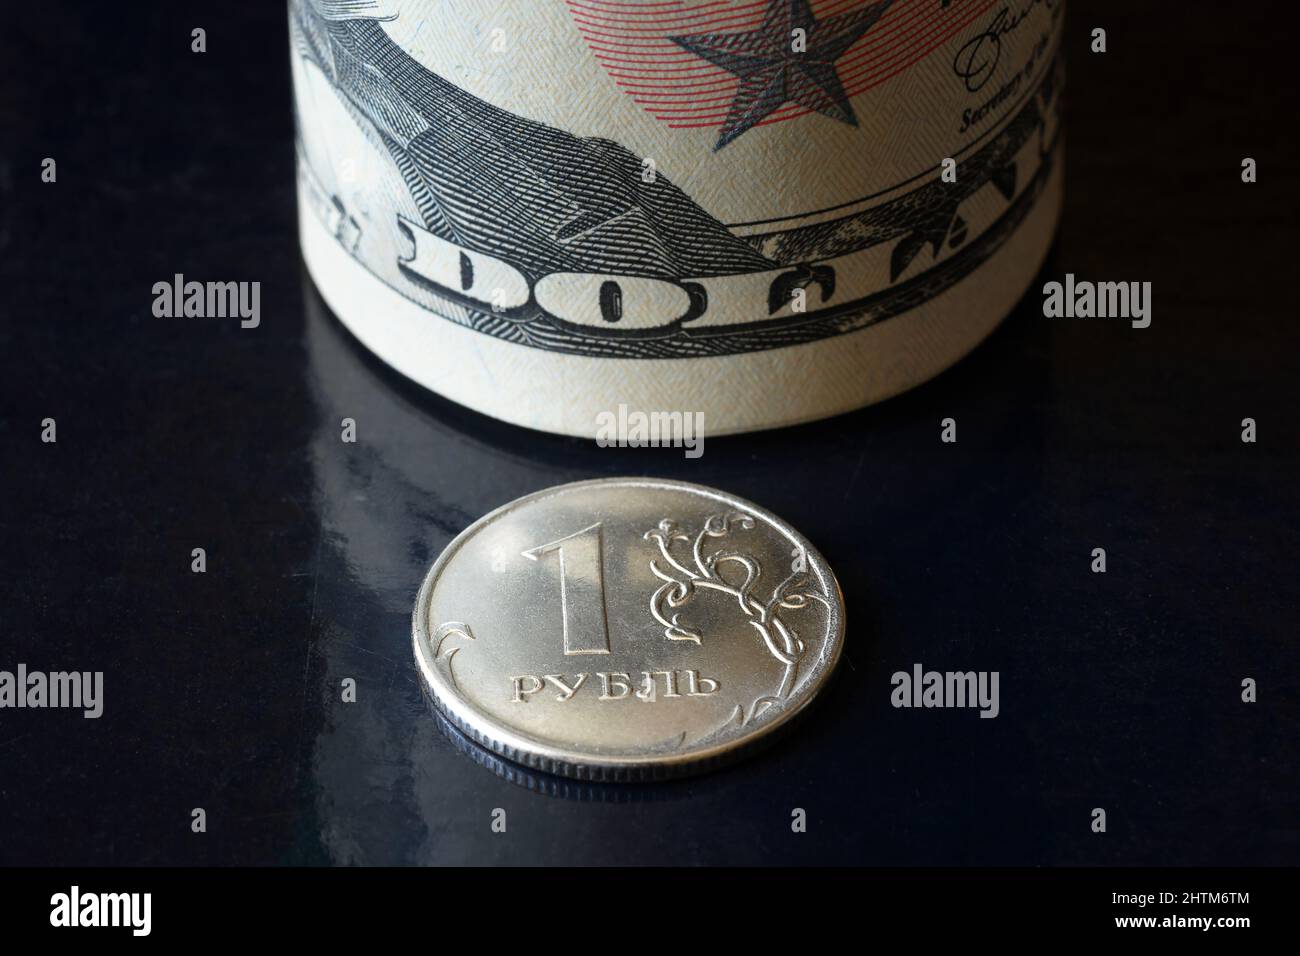 Russian ruble coin and dollar bills roll, ruble money is under pressure from geopolitics. Concept of ruble devaluation, inflation in Russia, economy f Stock Photo